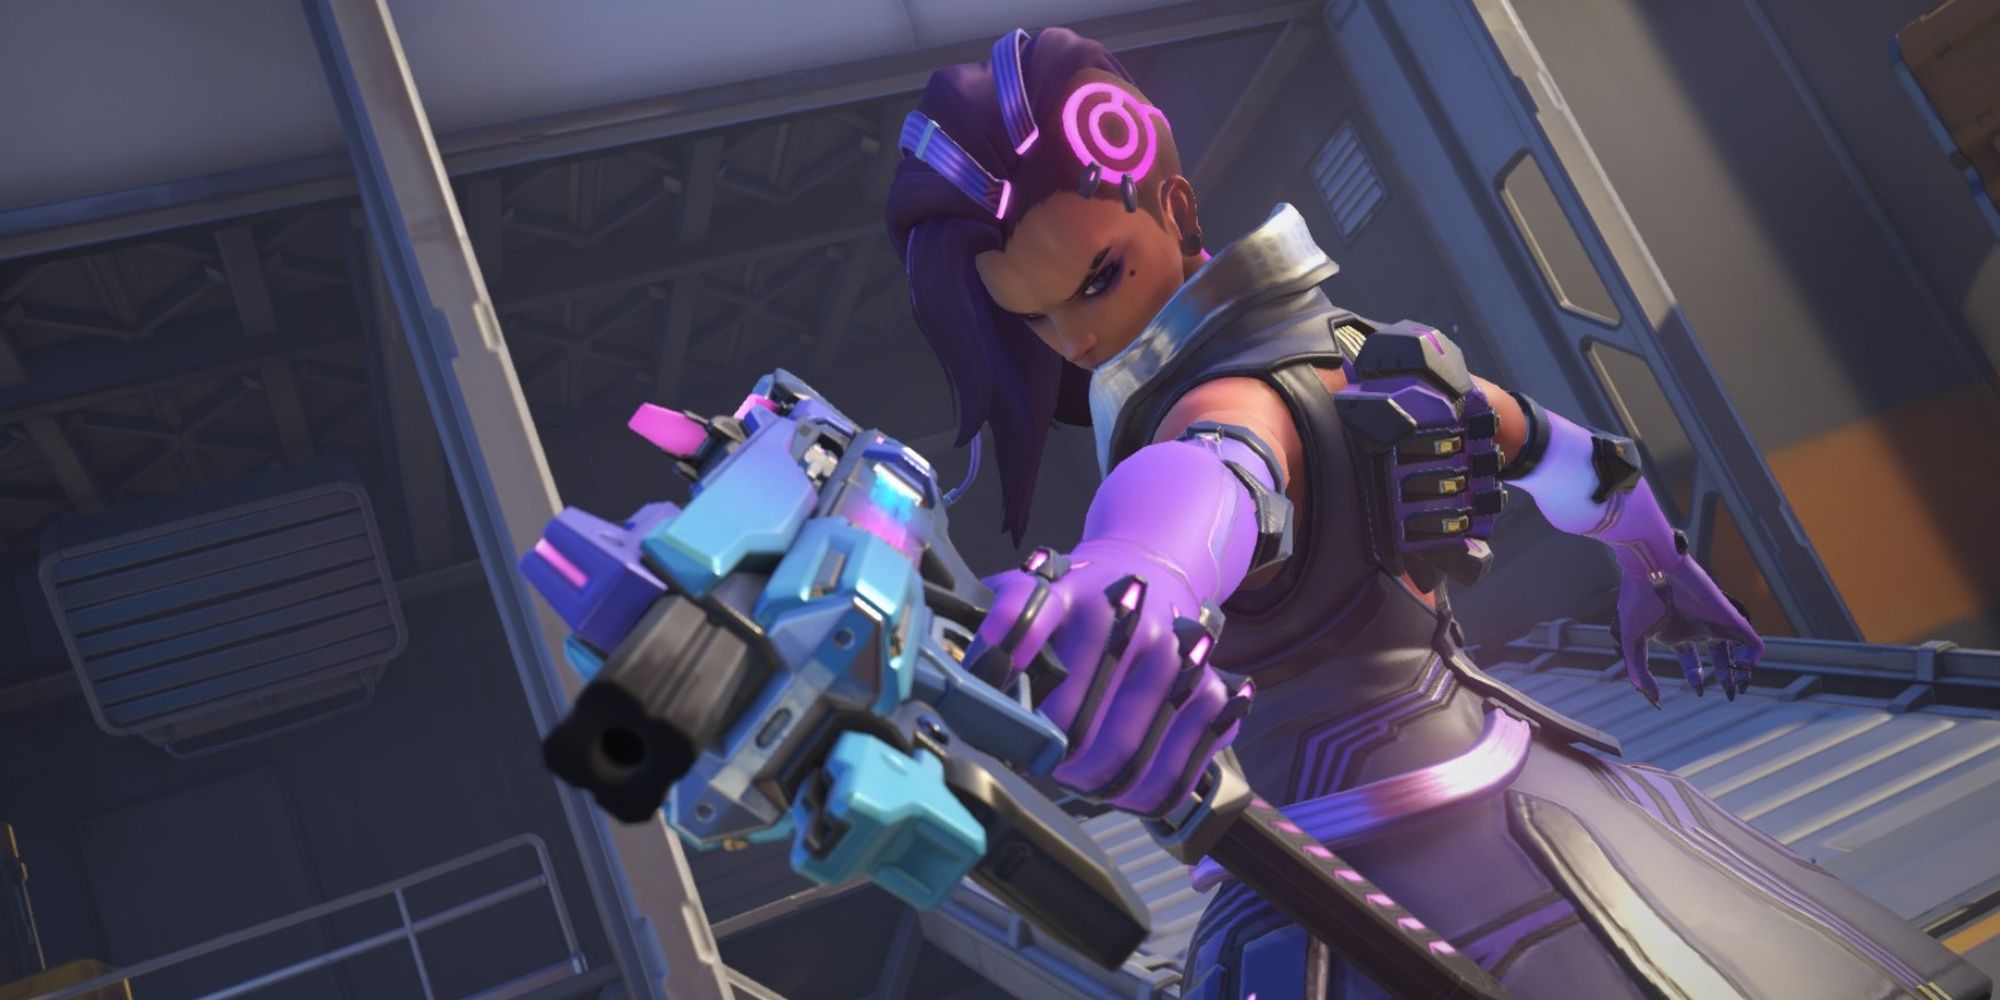 Sombra from Overwatch 2 points her gun at the camera